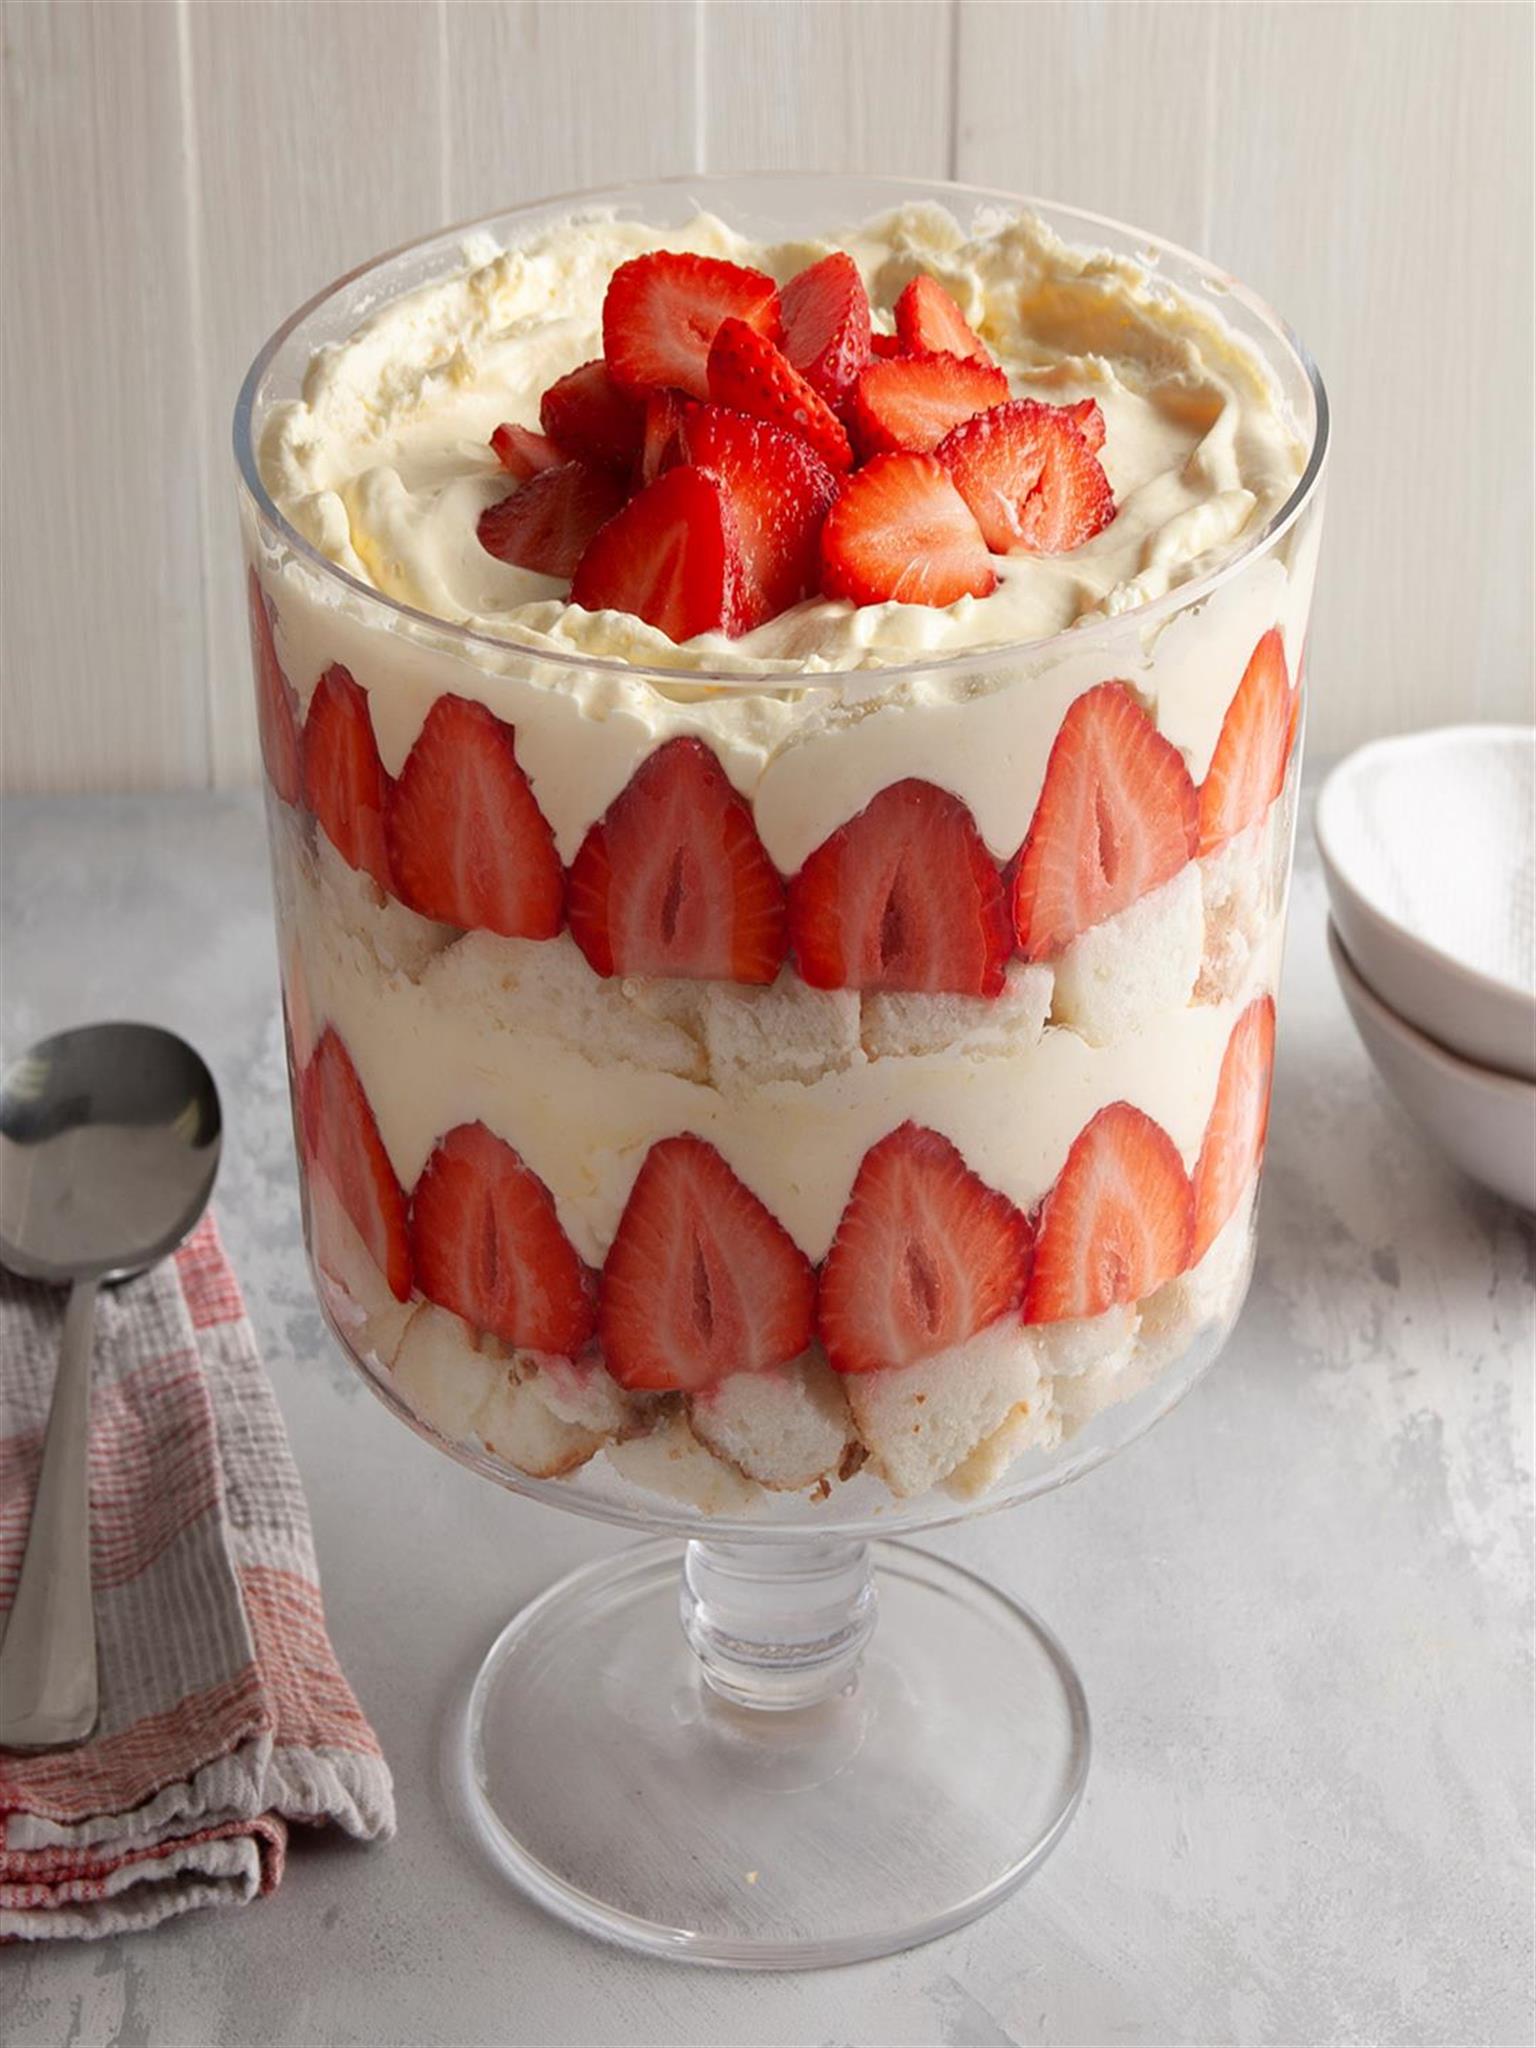 Gingerbread and White Chocolate Mousse Trifle Recipe - Monica Glass